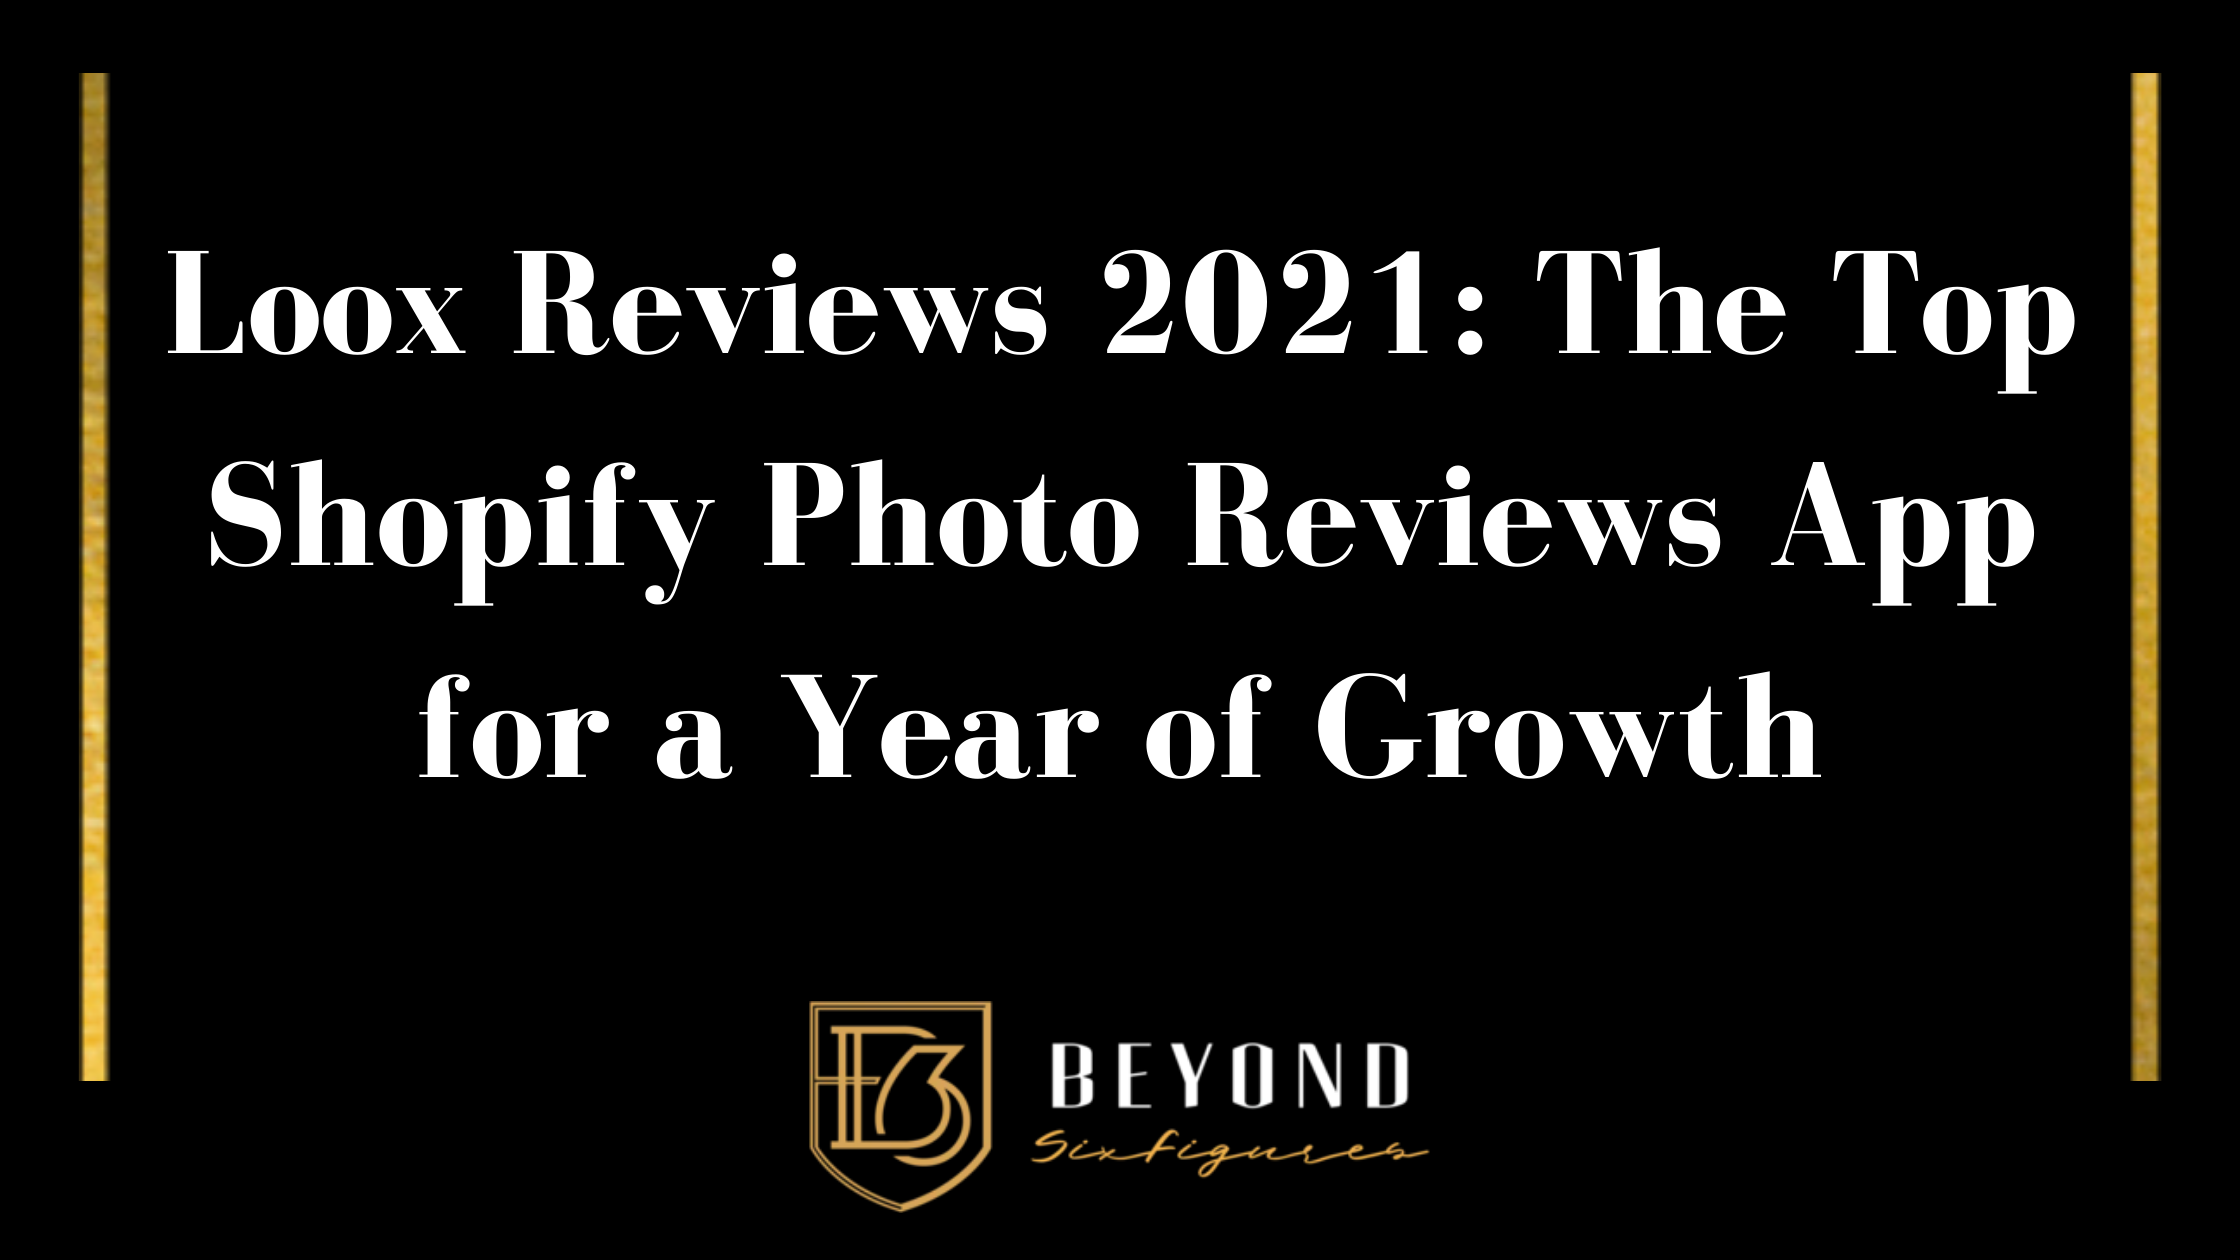 Blog Banner for Loox Reviews 2021: The Top Shopify Photo Reviews App for a Year of Growth